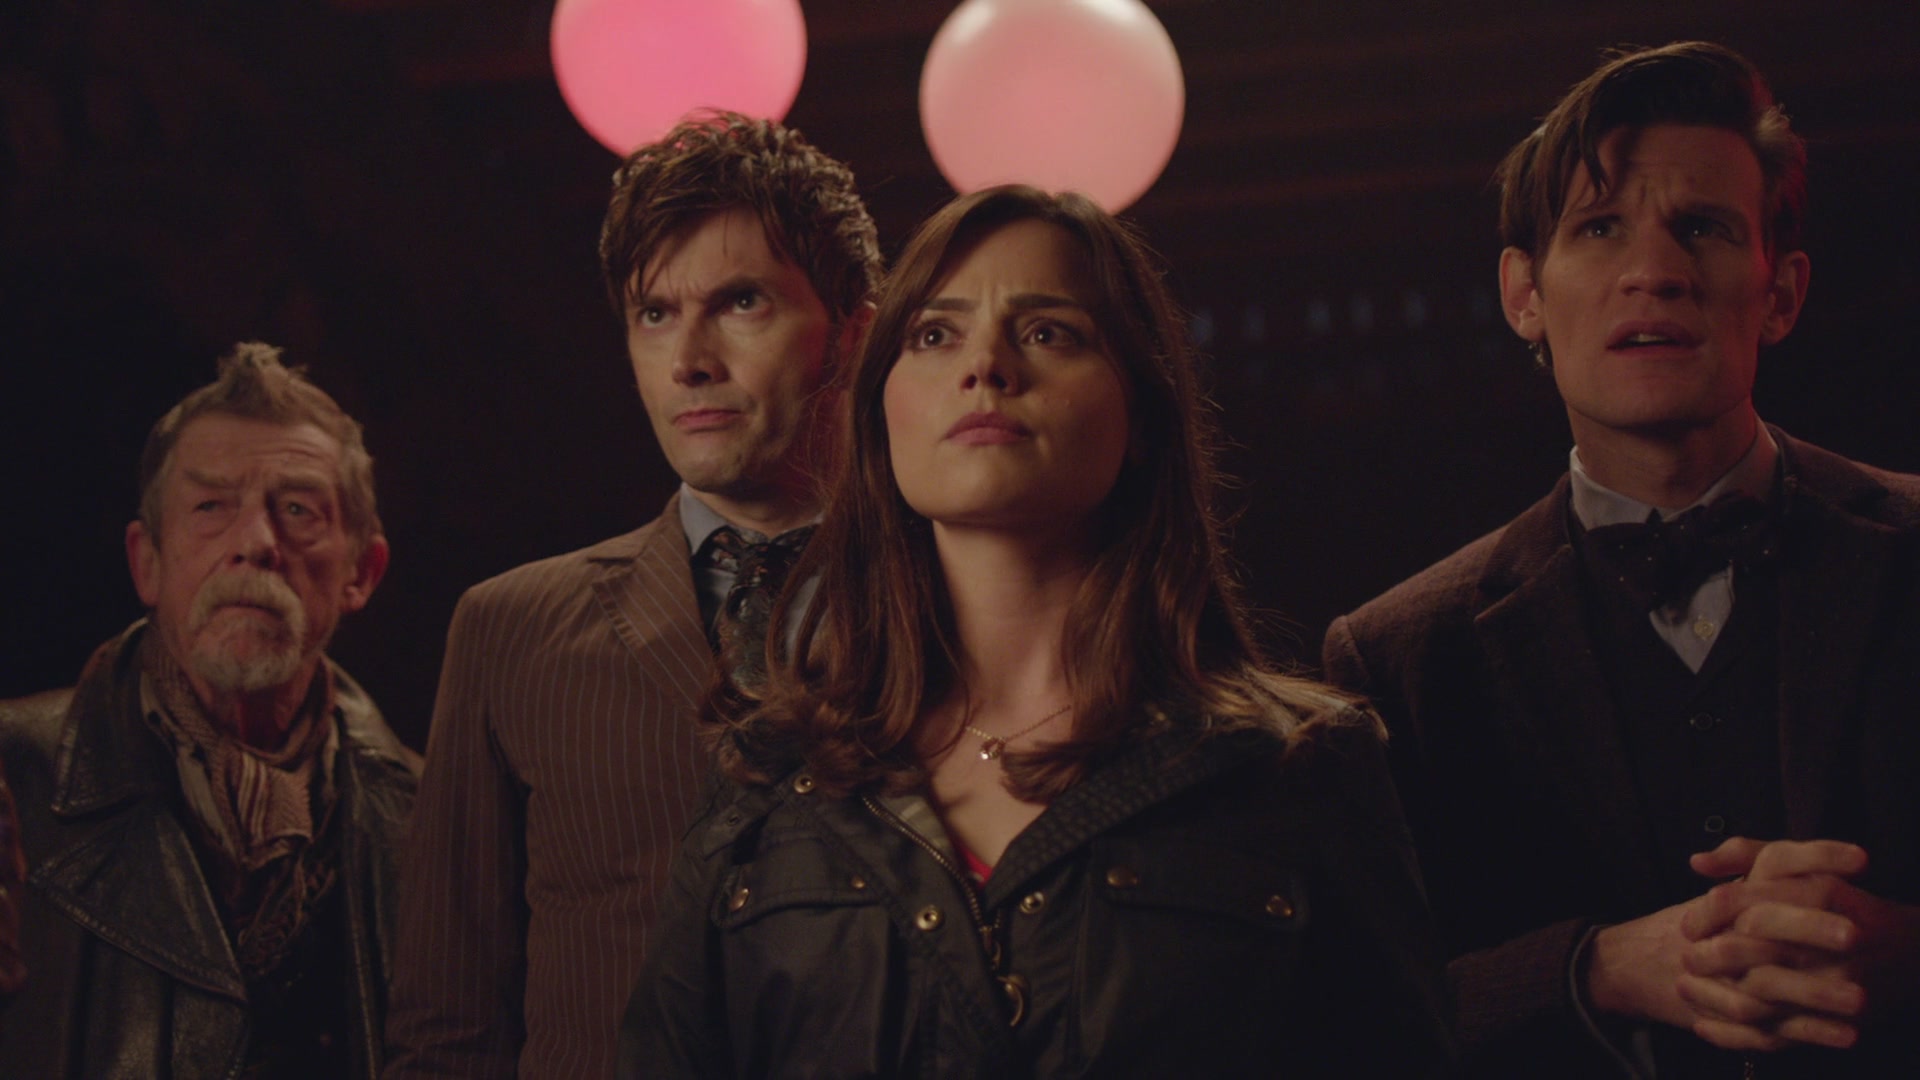 DayOfTheDoctor-Caps-0813.jpg